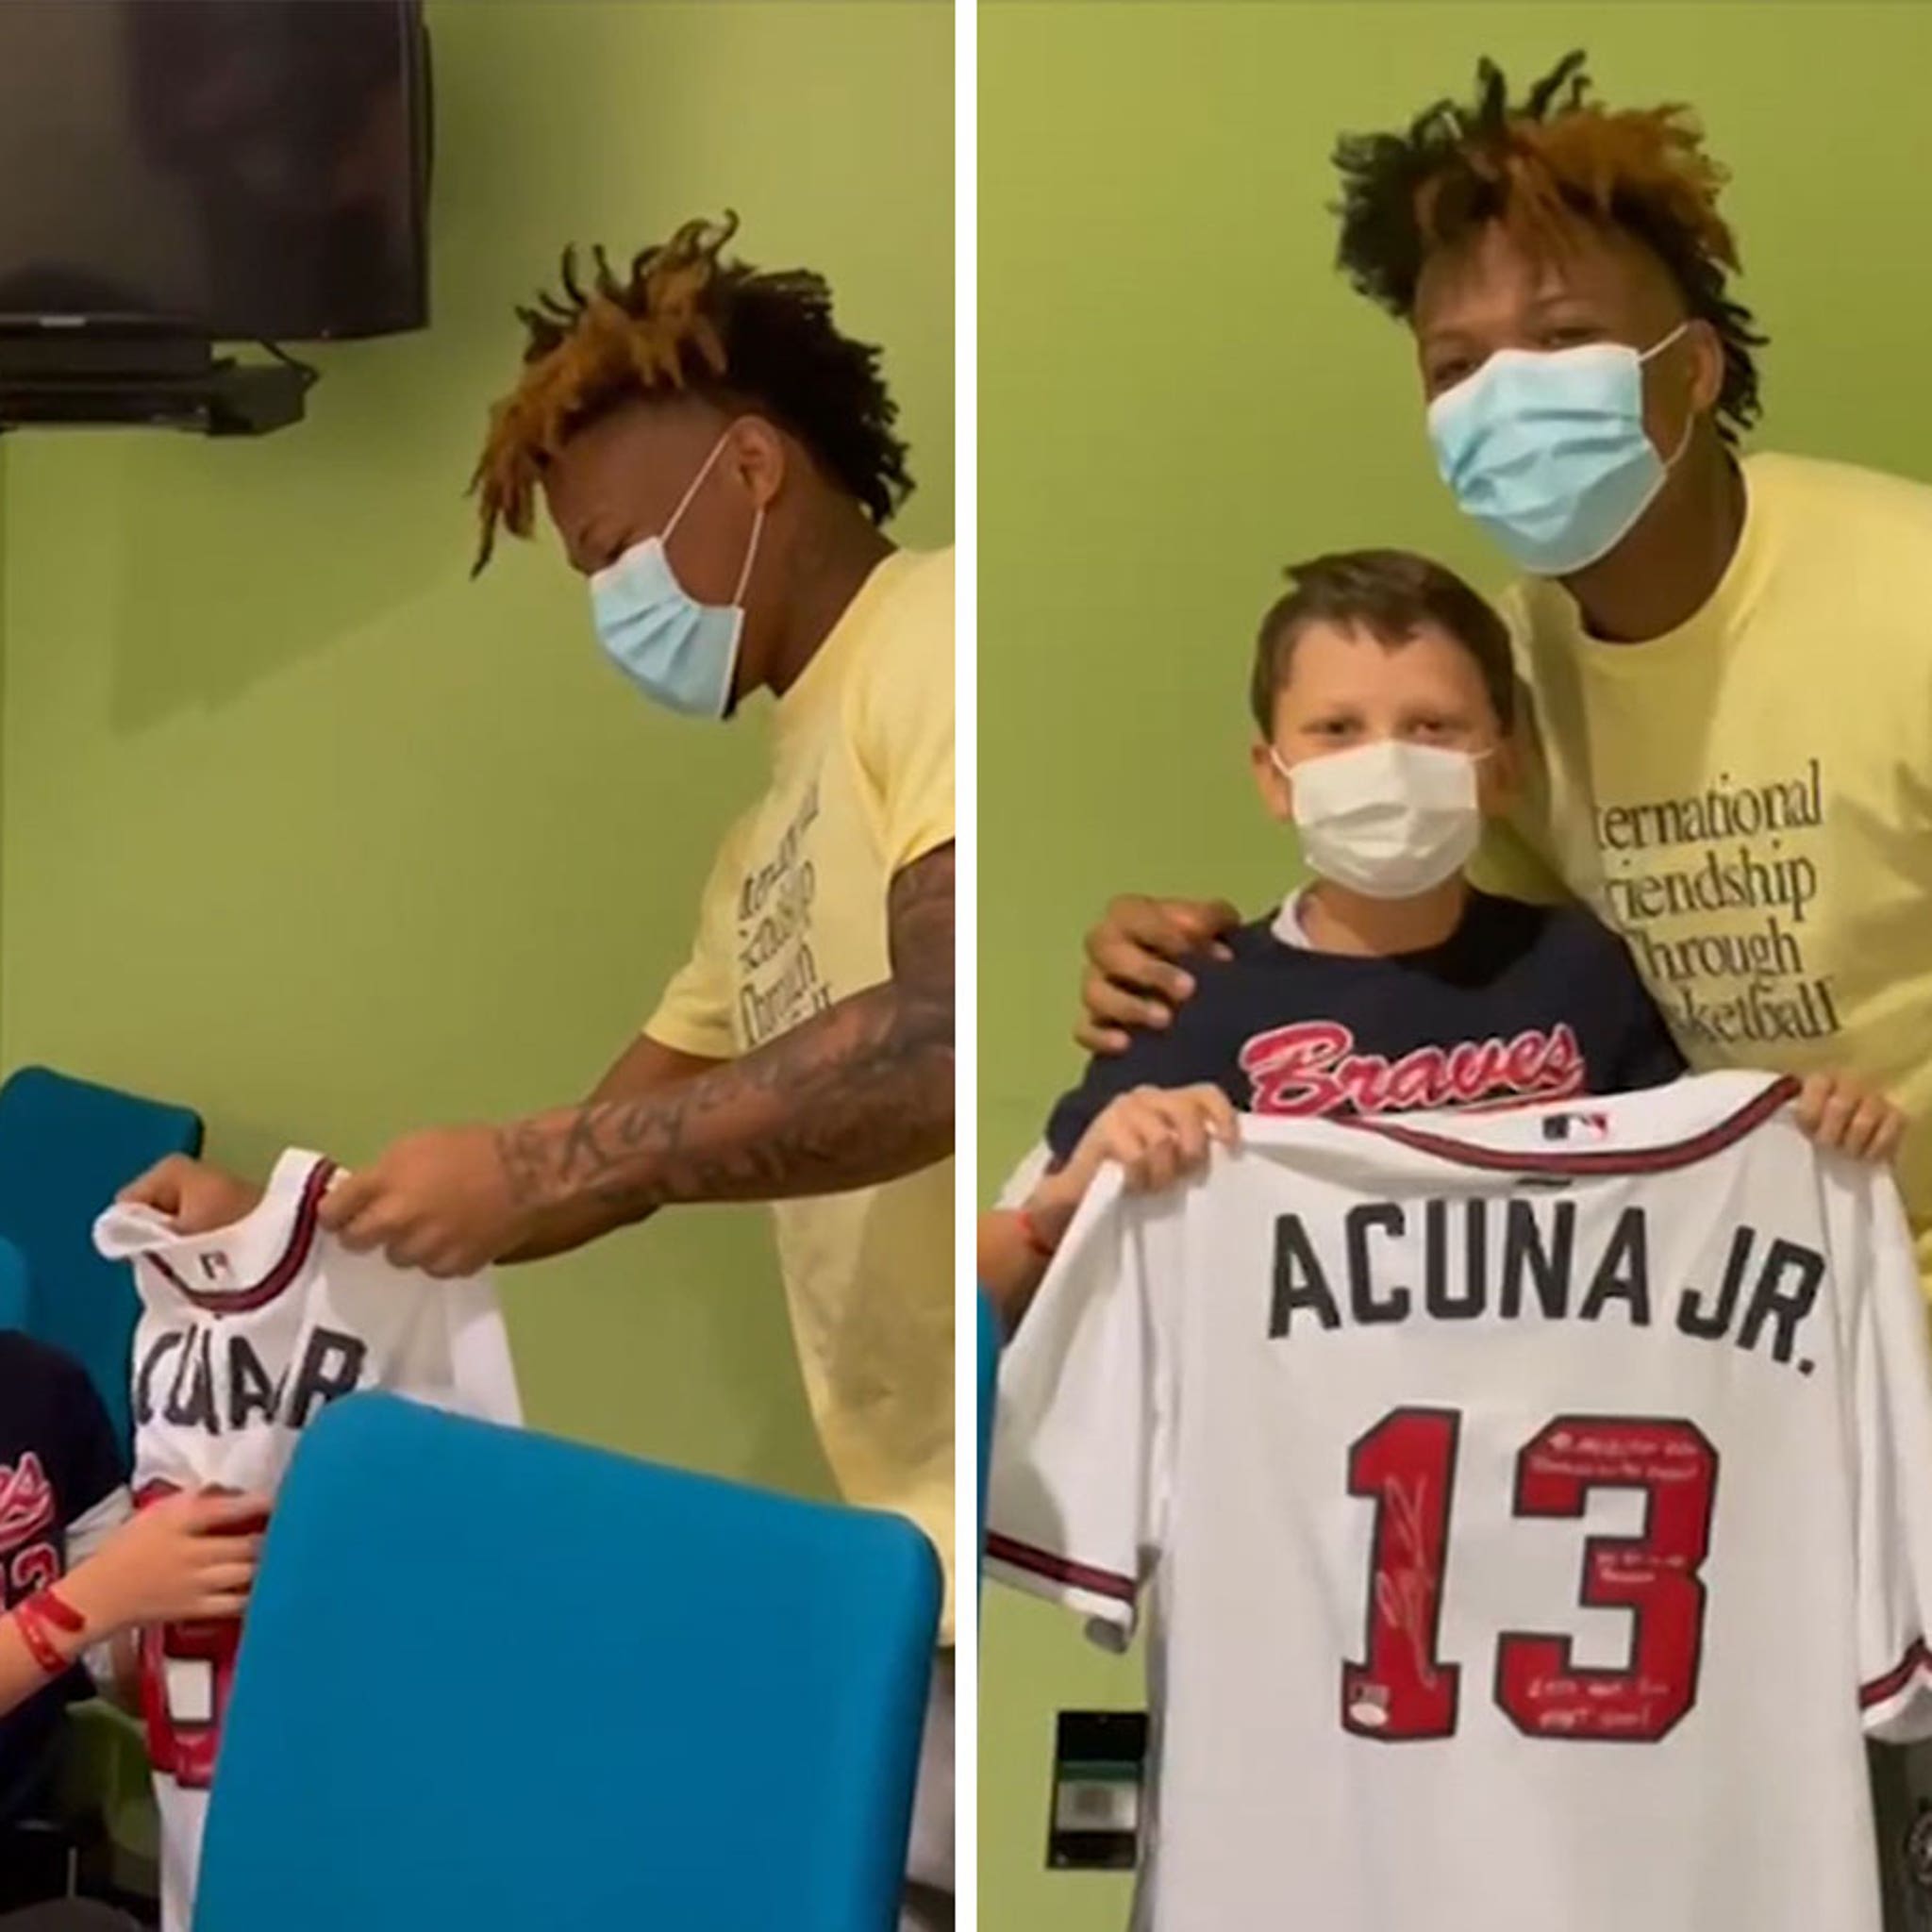 Ronald Acuña Jr. rocked the baby after his single off of Johan